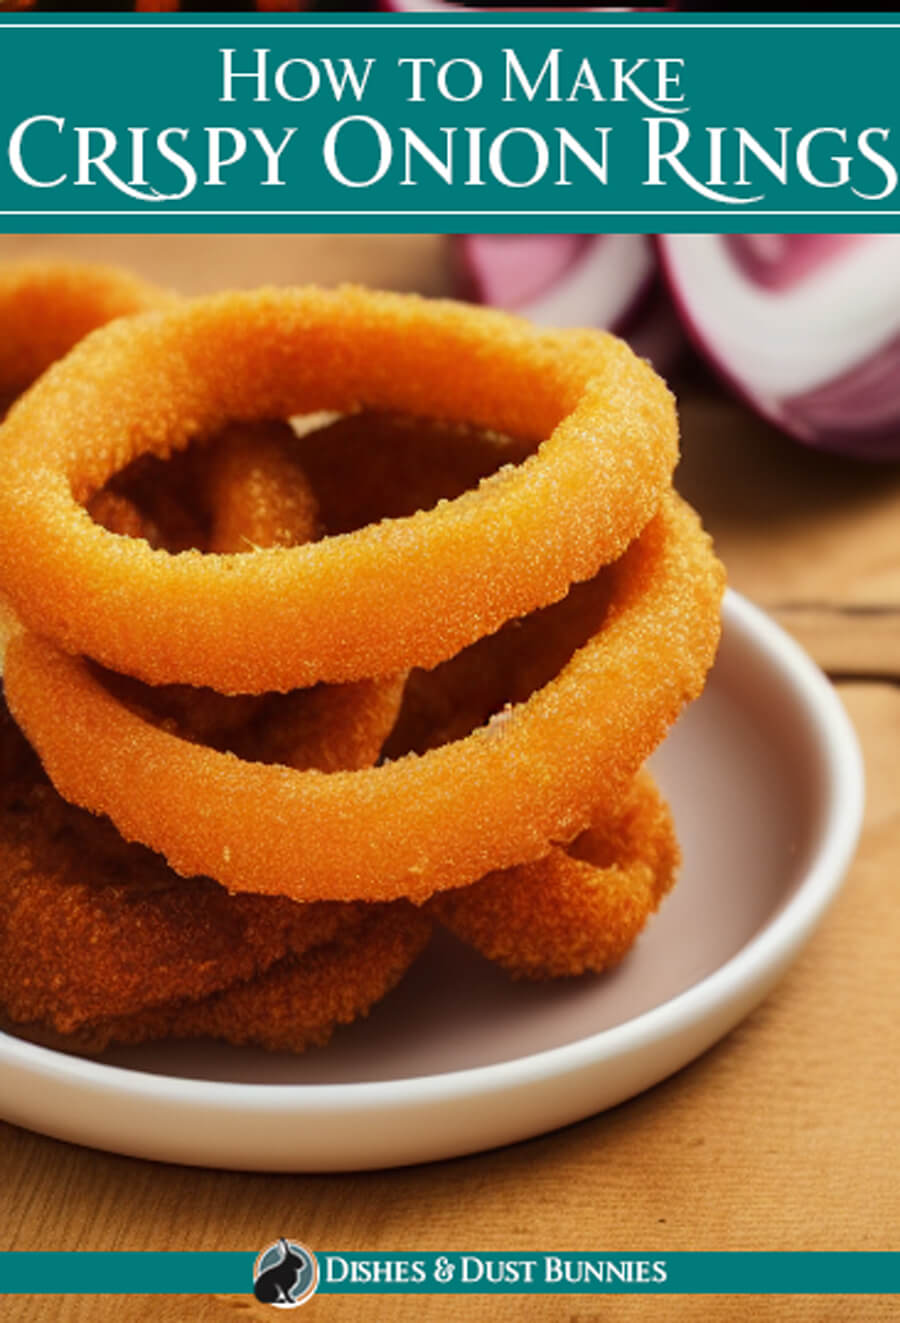 How to make perfect Crispy Onion Rings every time! - Dishes & Dust Bunnies